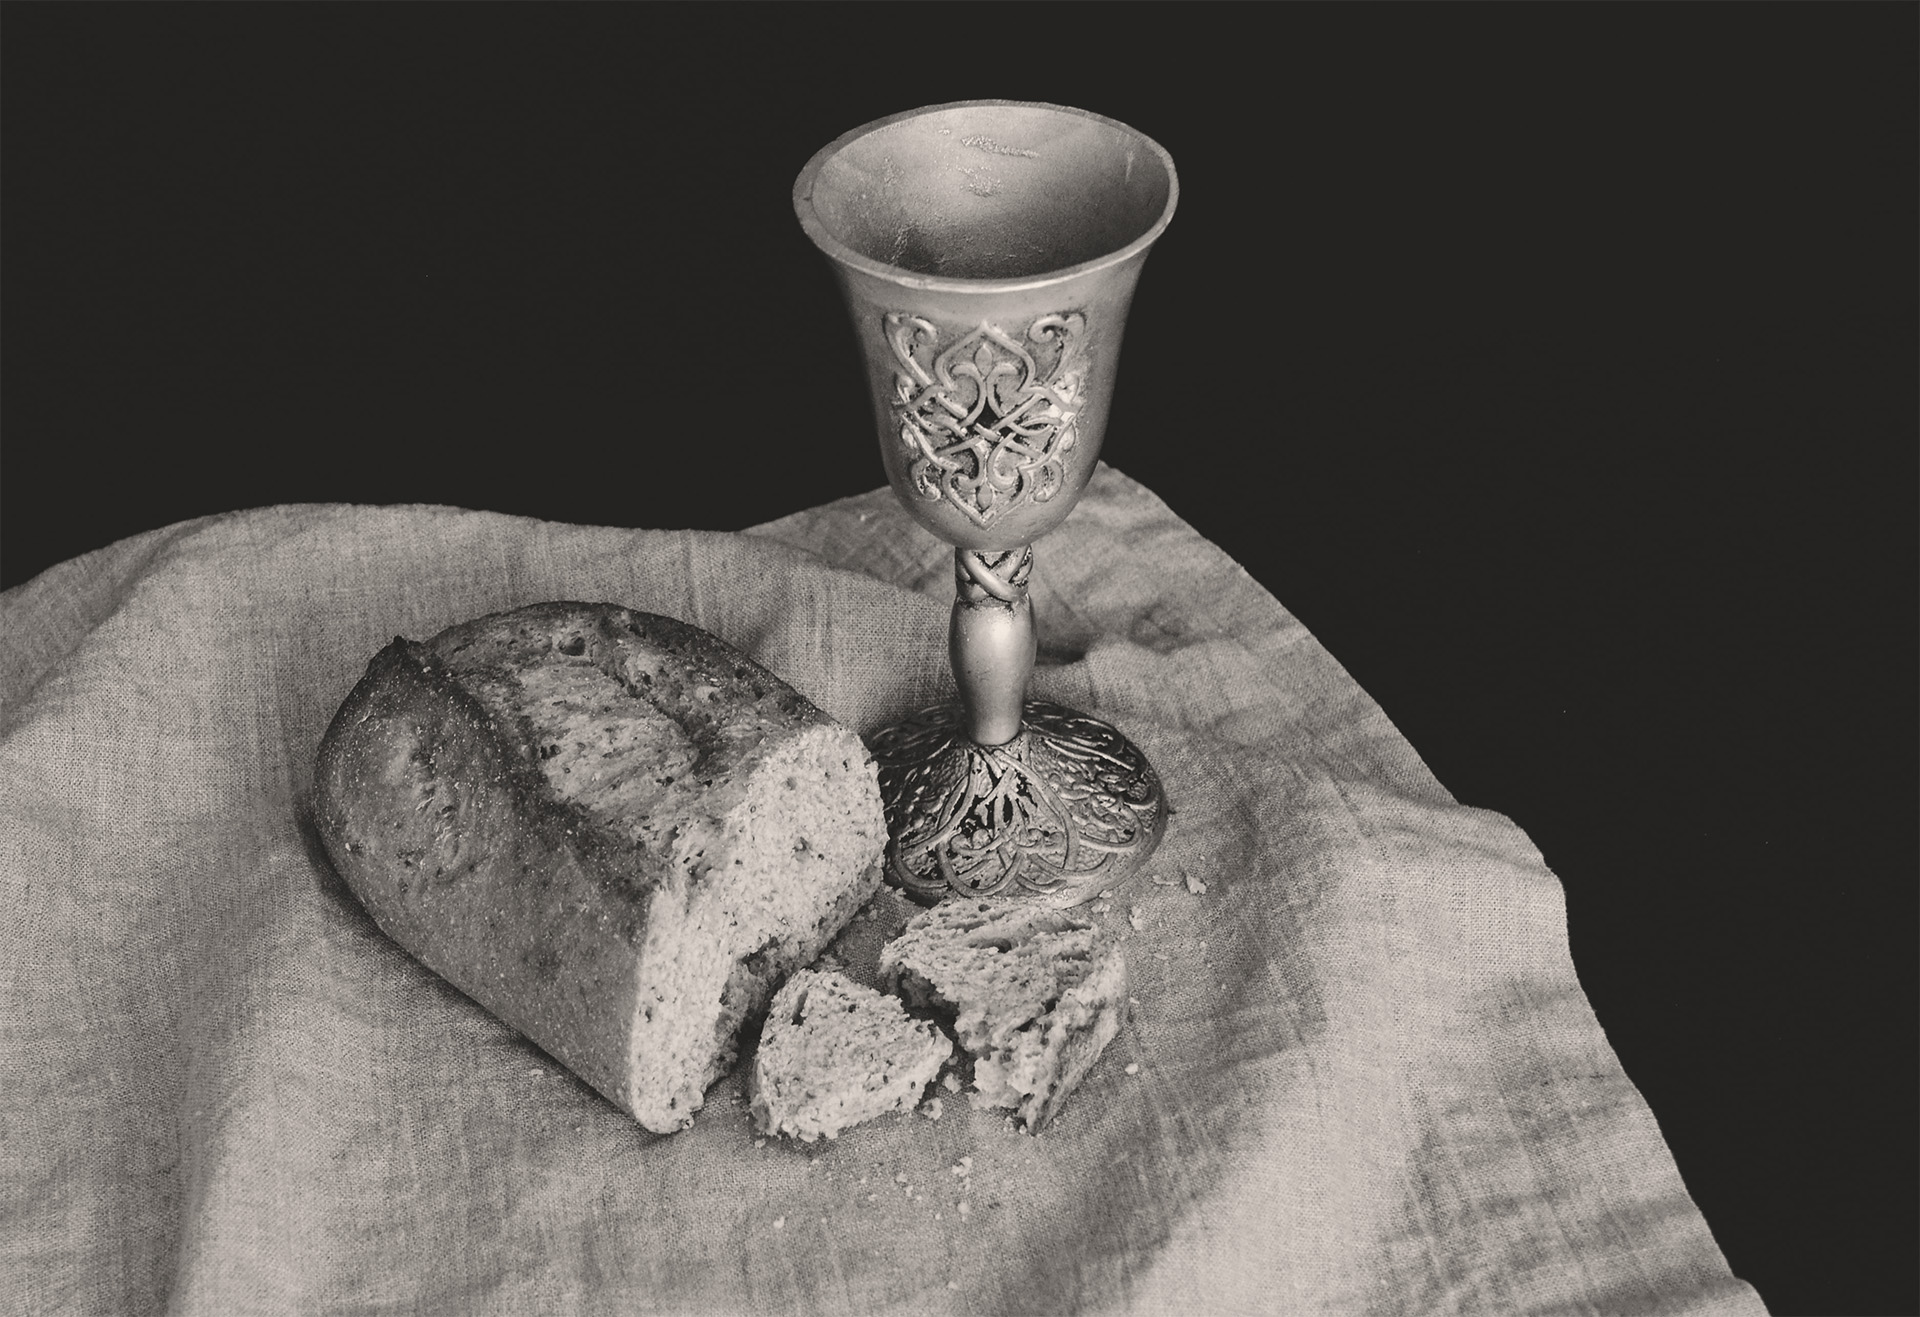 The #BeUMC campaign reminds us of who we are at our best. As people of God called The United Methodist Church, we’re faithful followers of Jesus seeking to make the world a better place. We are deeply rooted, finding commonality in our rich history, sacraments and values. (Background communion image).